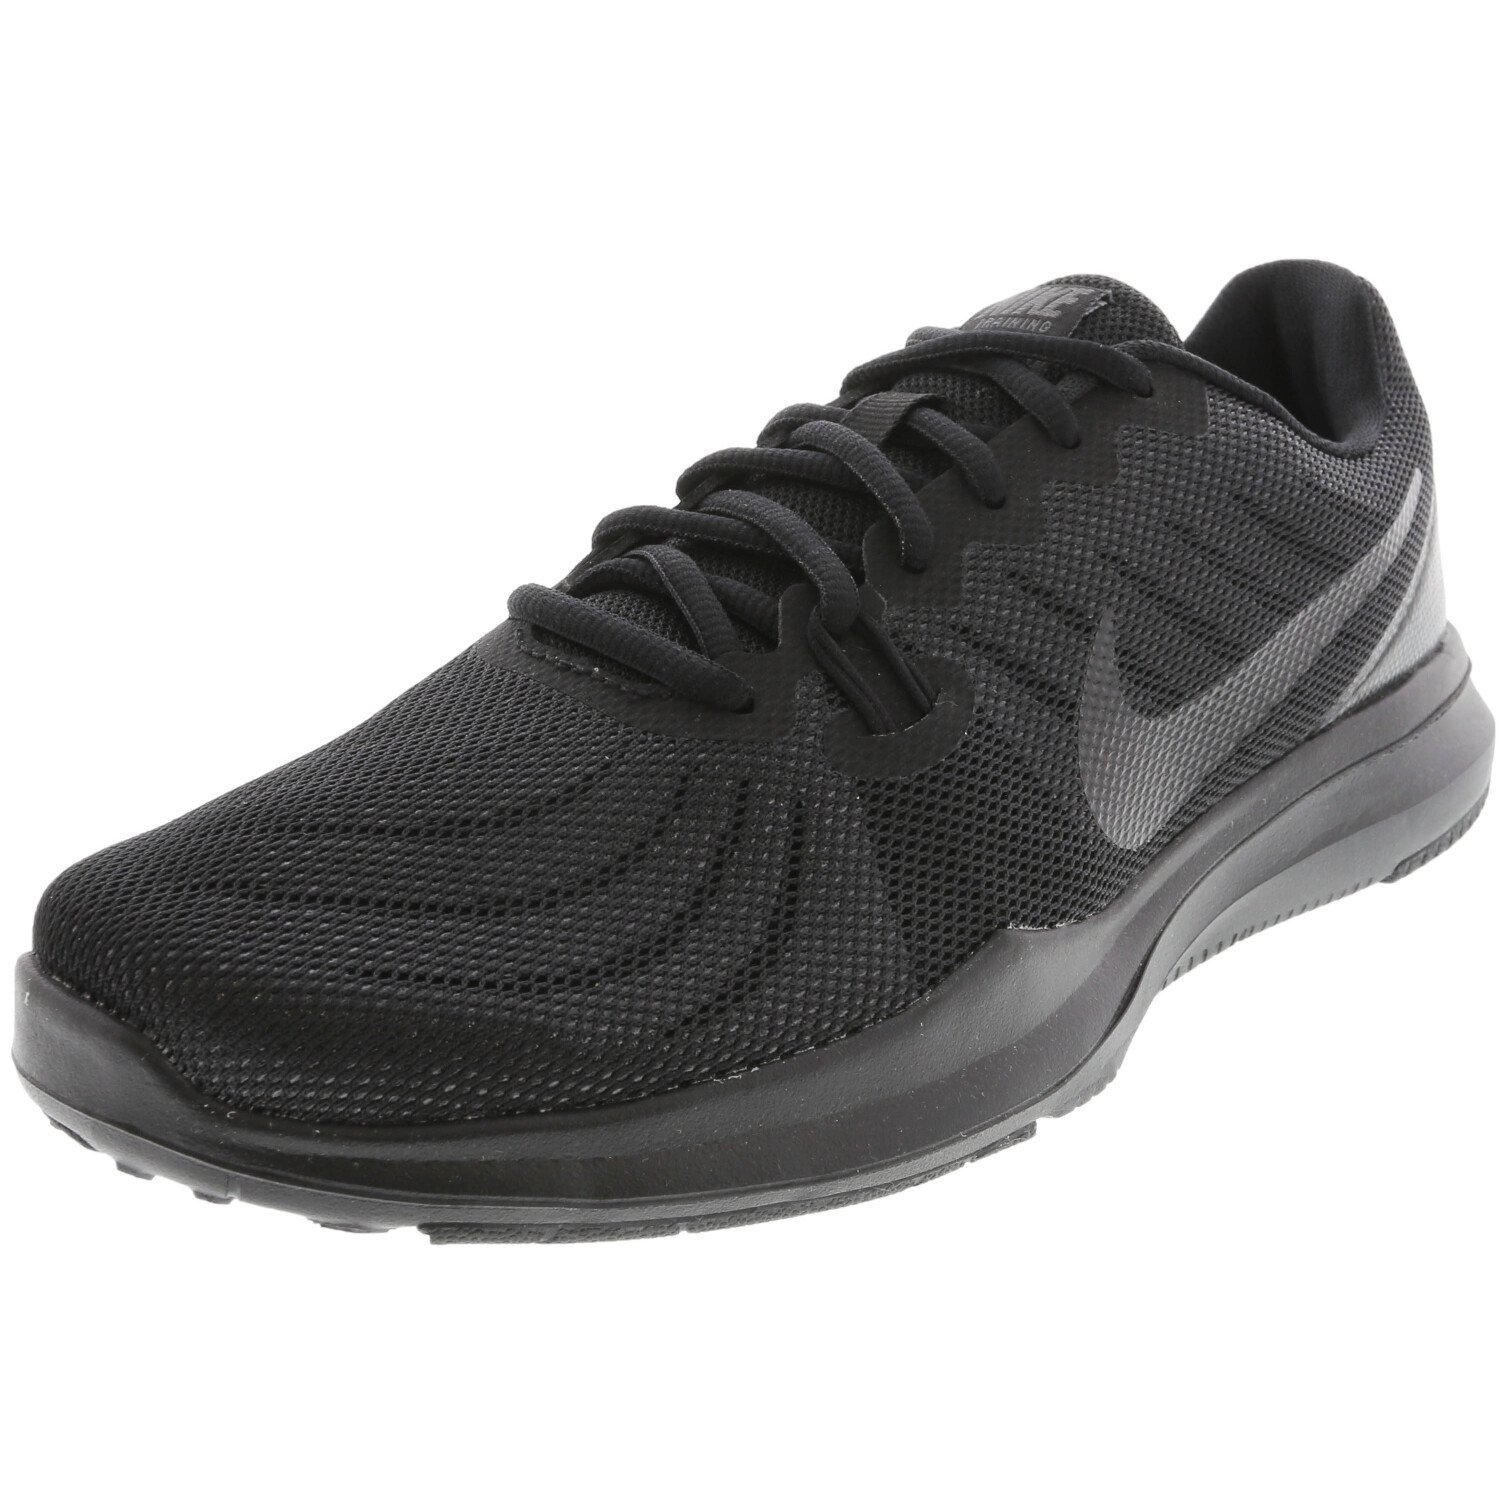 Nike Women's In-Season Tr 7 Black / Anthracite Ankle-High Training Shoes -  8M - Walmart.com